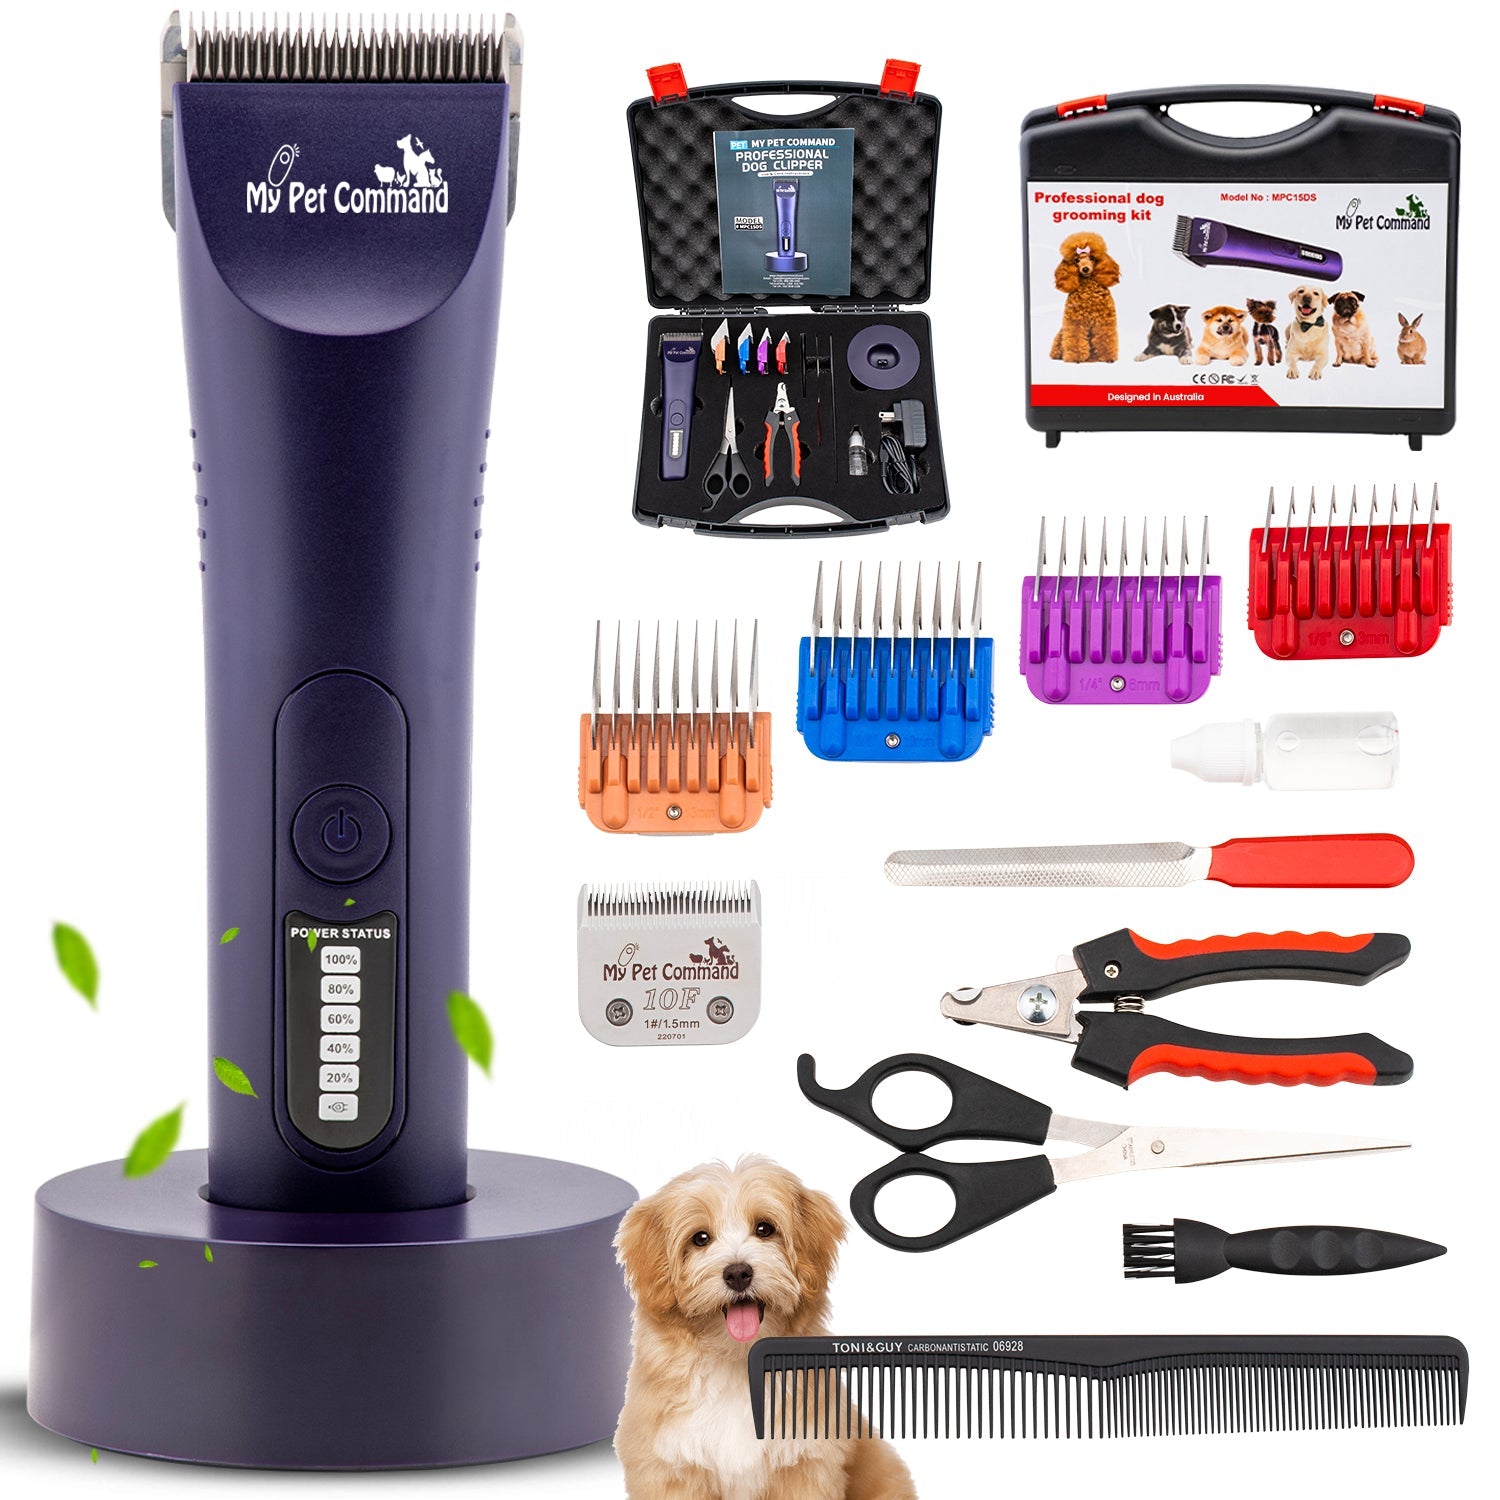 Cordless Professional Dog Grooming Clippers Kit for Pets with Heavy Duty Blades